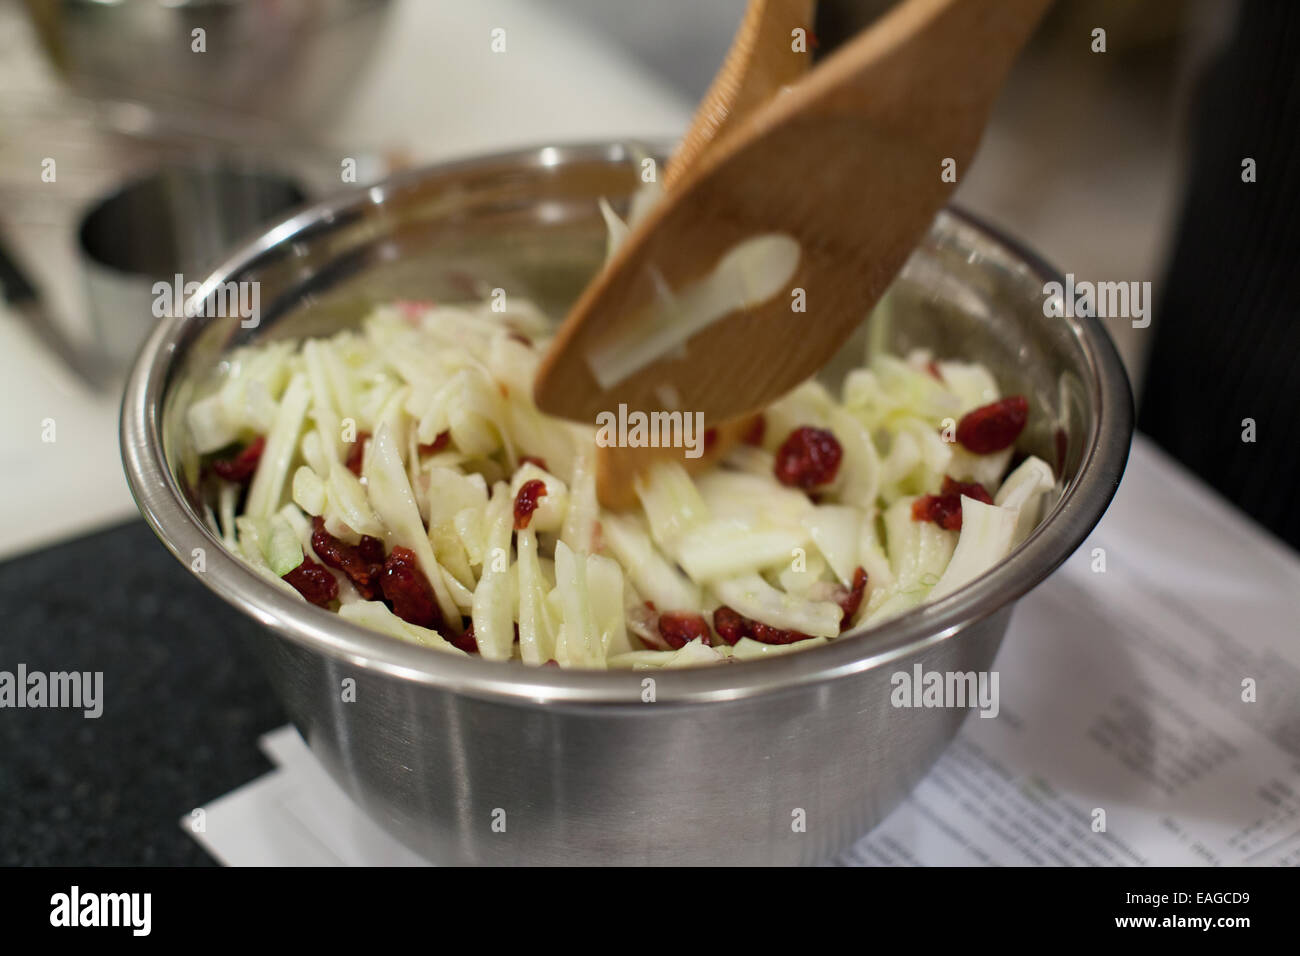 Salad tongs mixing apples, fennel, and cranberries for a salad Stock Photo